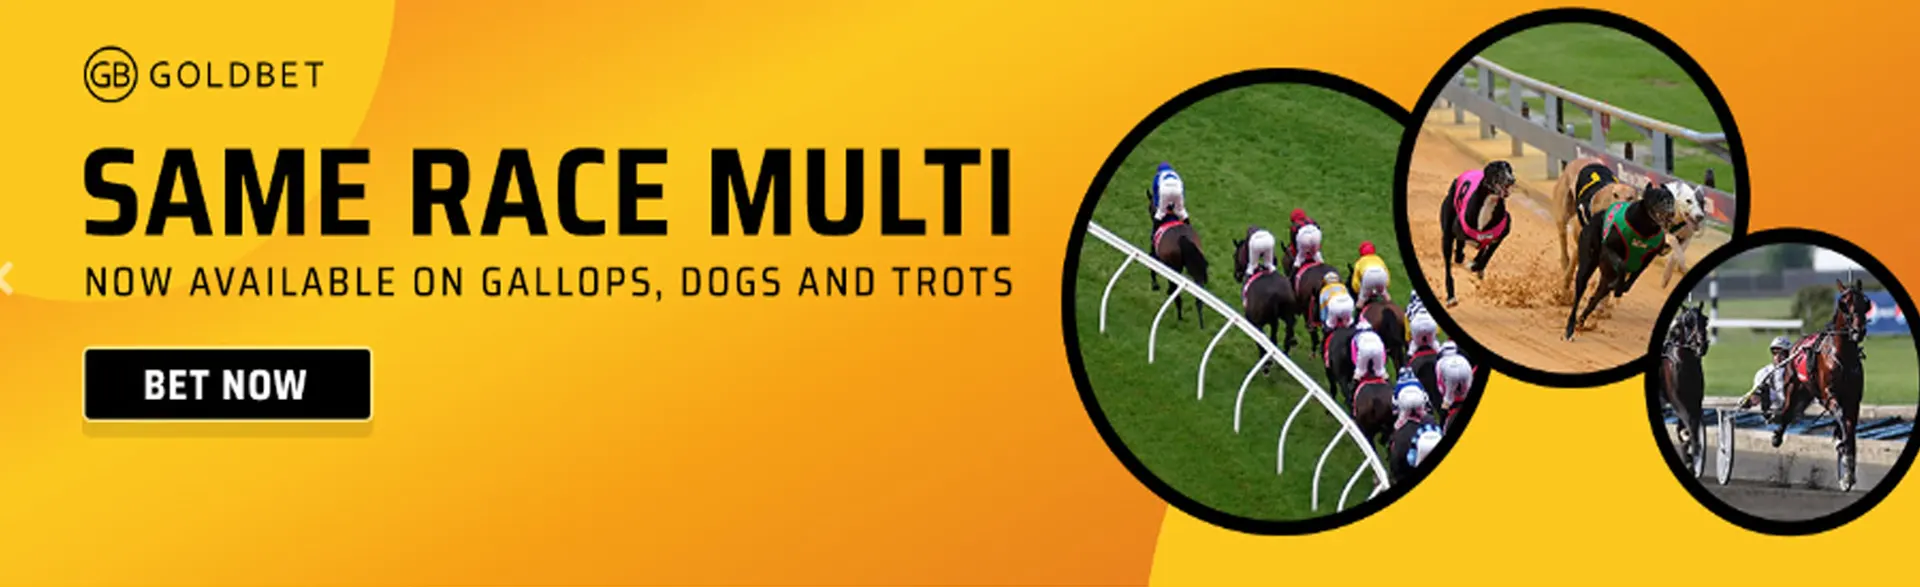 Goldbet sport offers same race multi betting options on gallops, dogs, and trots.